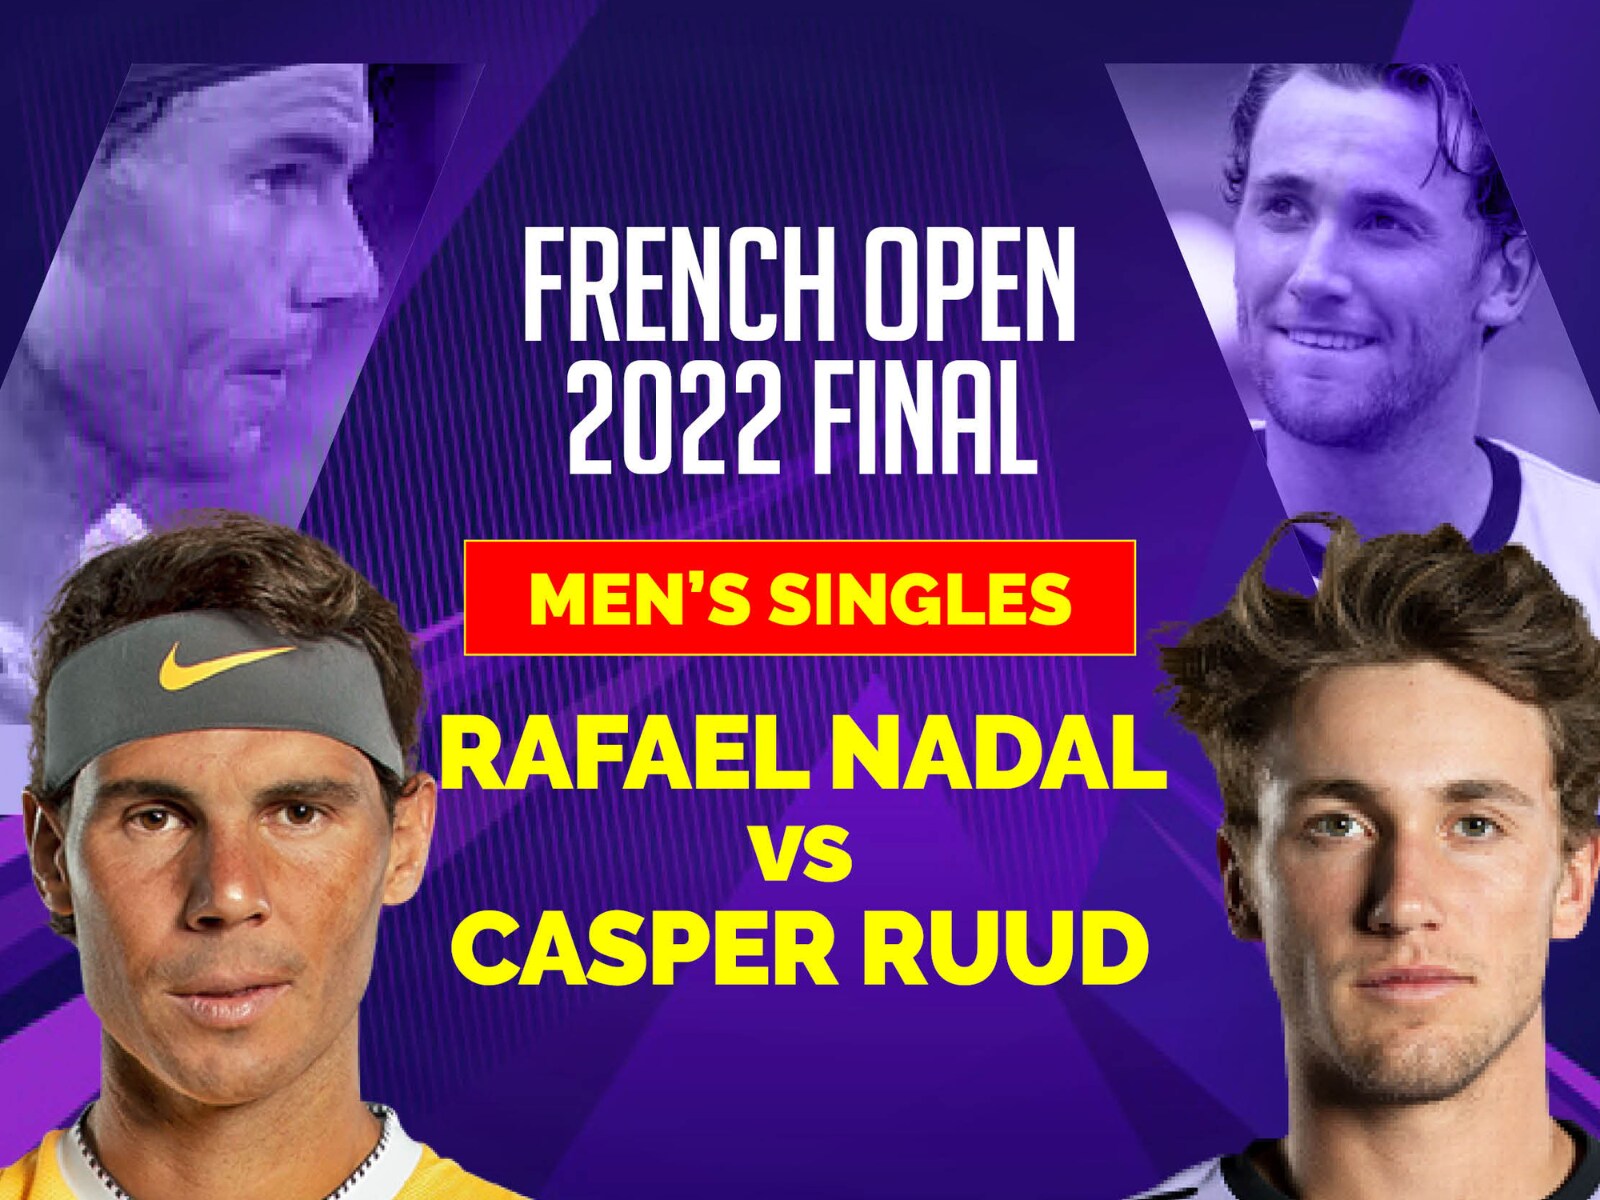 French Open 2022 Mens Singles Final Highlights Rafael Nadal Beats Casper Ruud 6-3,6-3,6-0 to Win 14th Roland Garros Title; Claims Record-extending 22nd Grand Slam